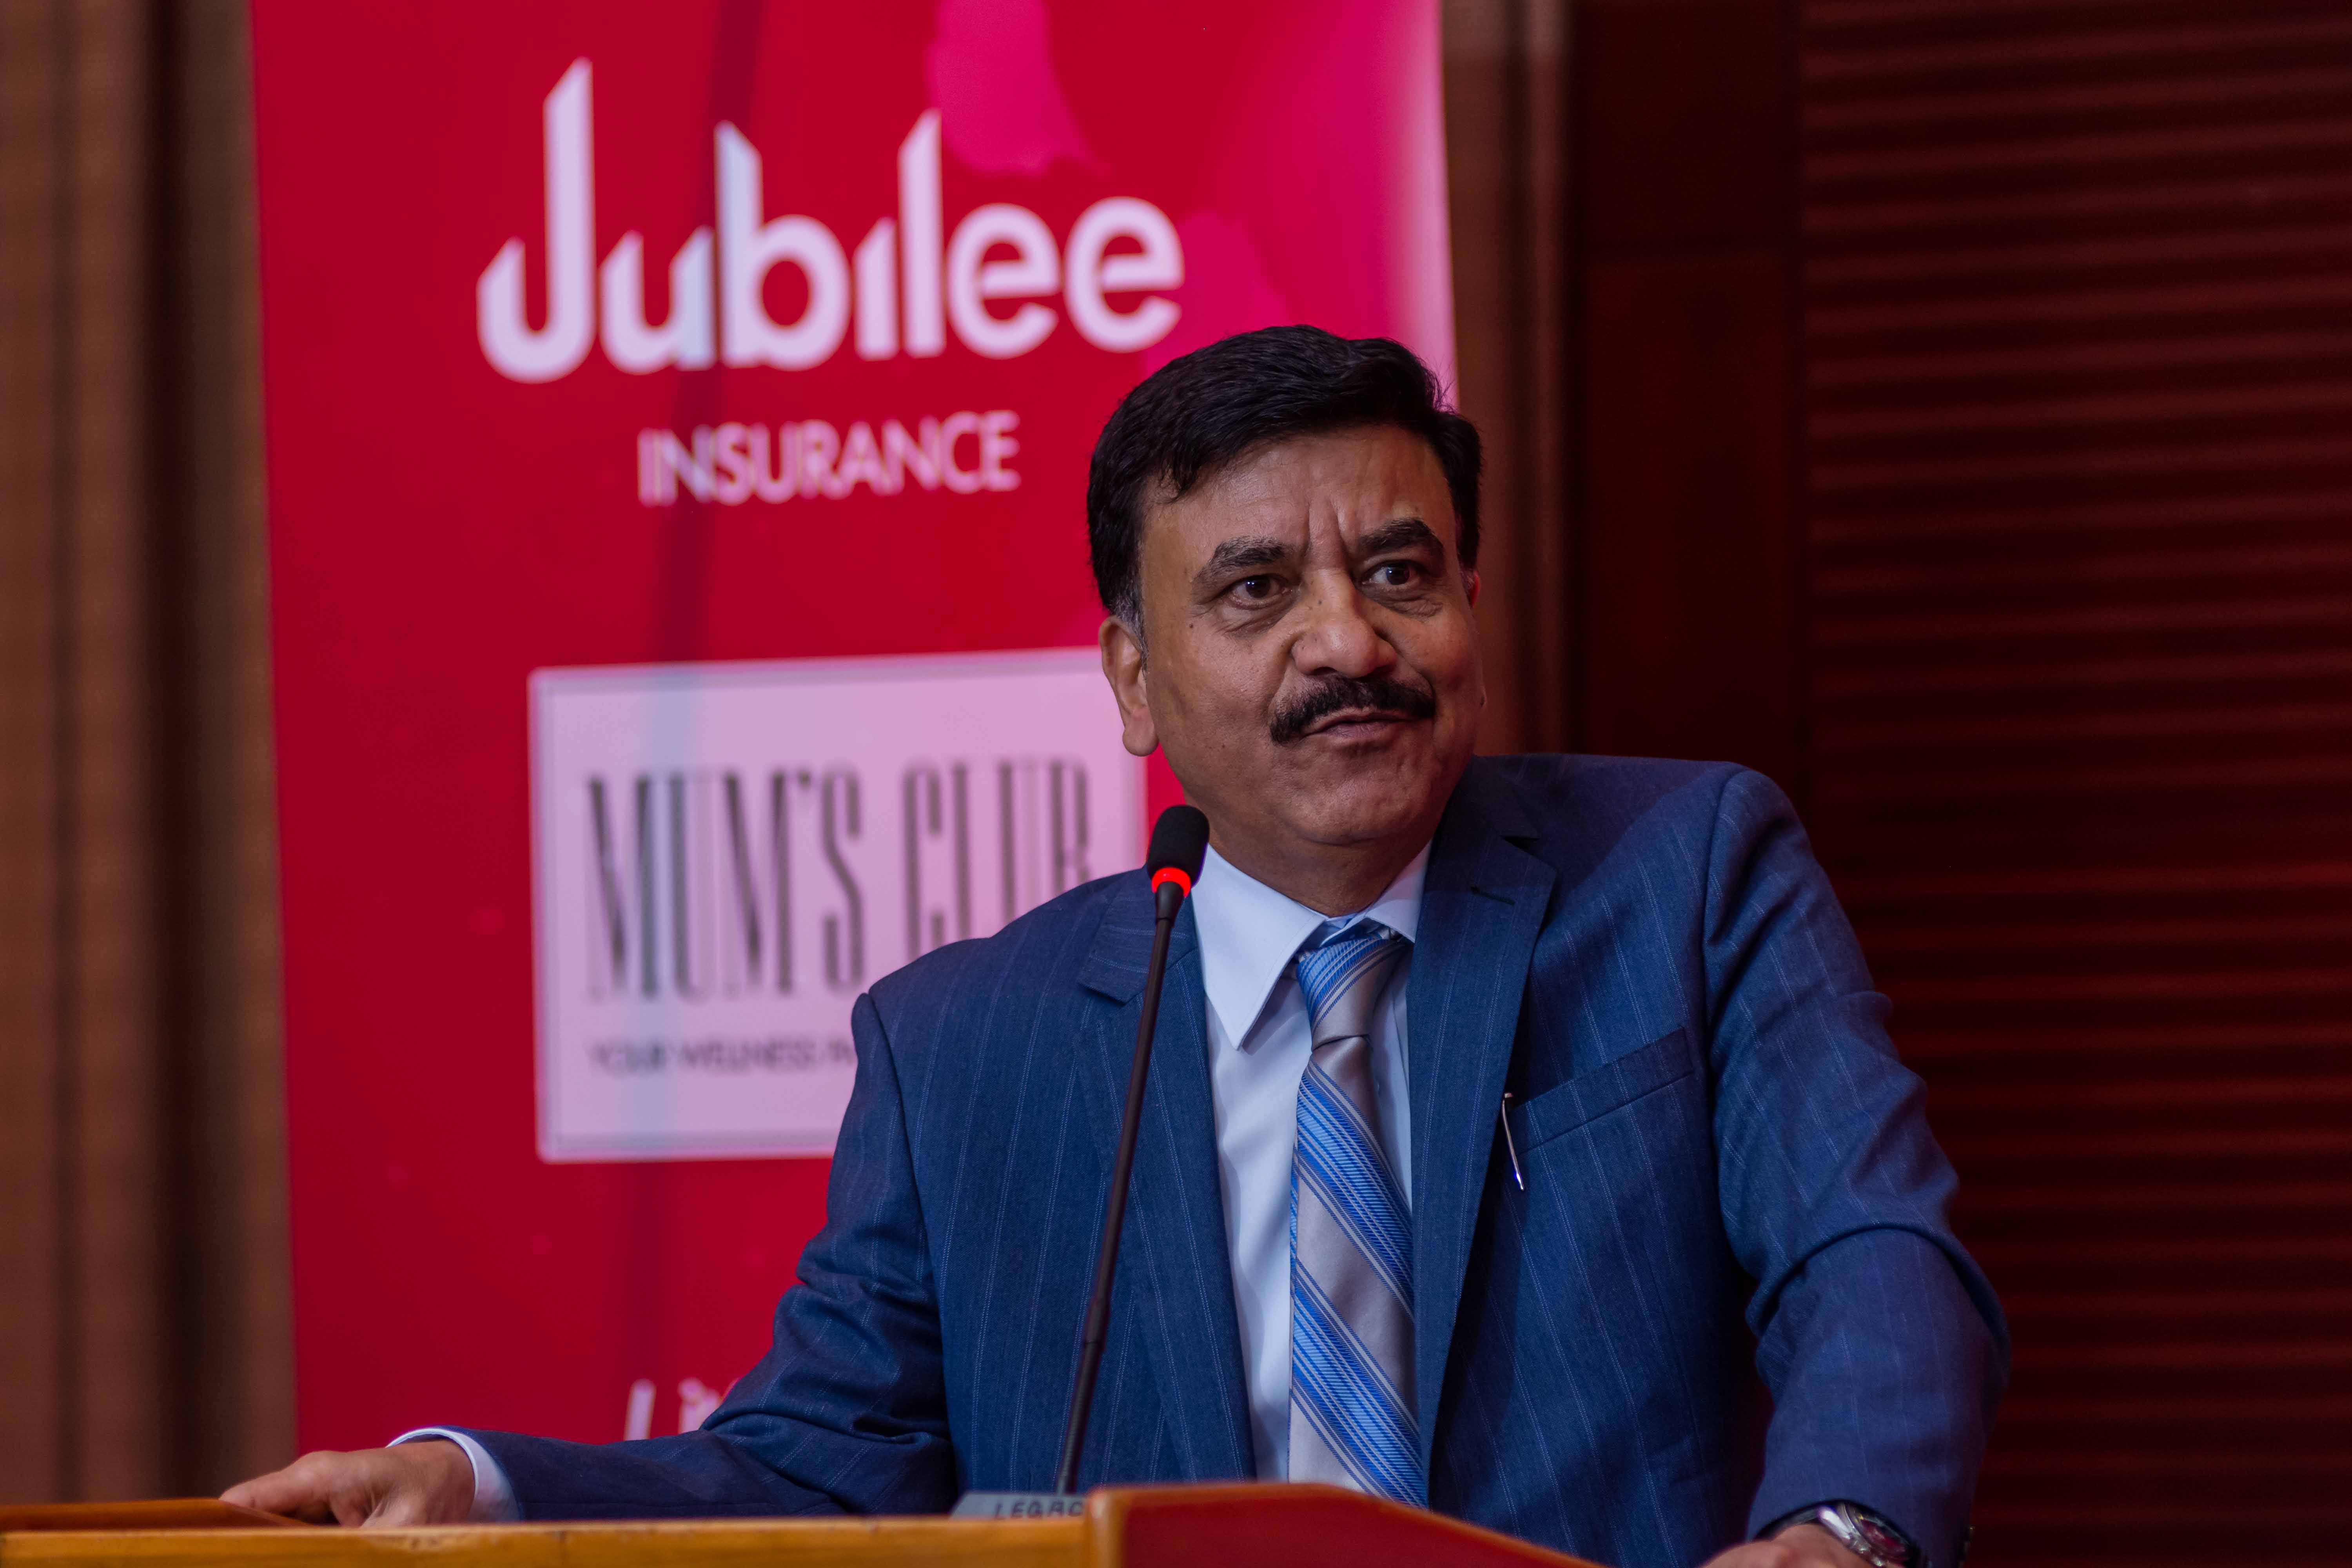 Mr Deepak Pandey, the CEO Jubilee Insurance addresses guests during the Jubilee Mum’s Club launch held at the Kampala Serena hotel on Tuesday. 